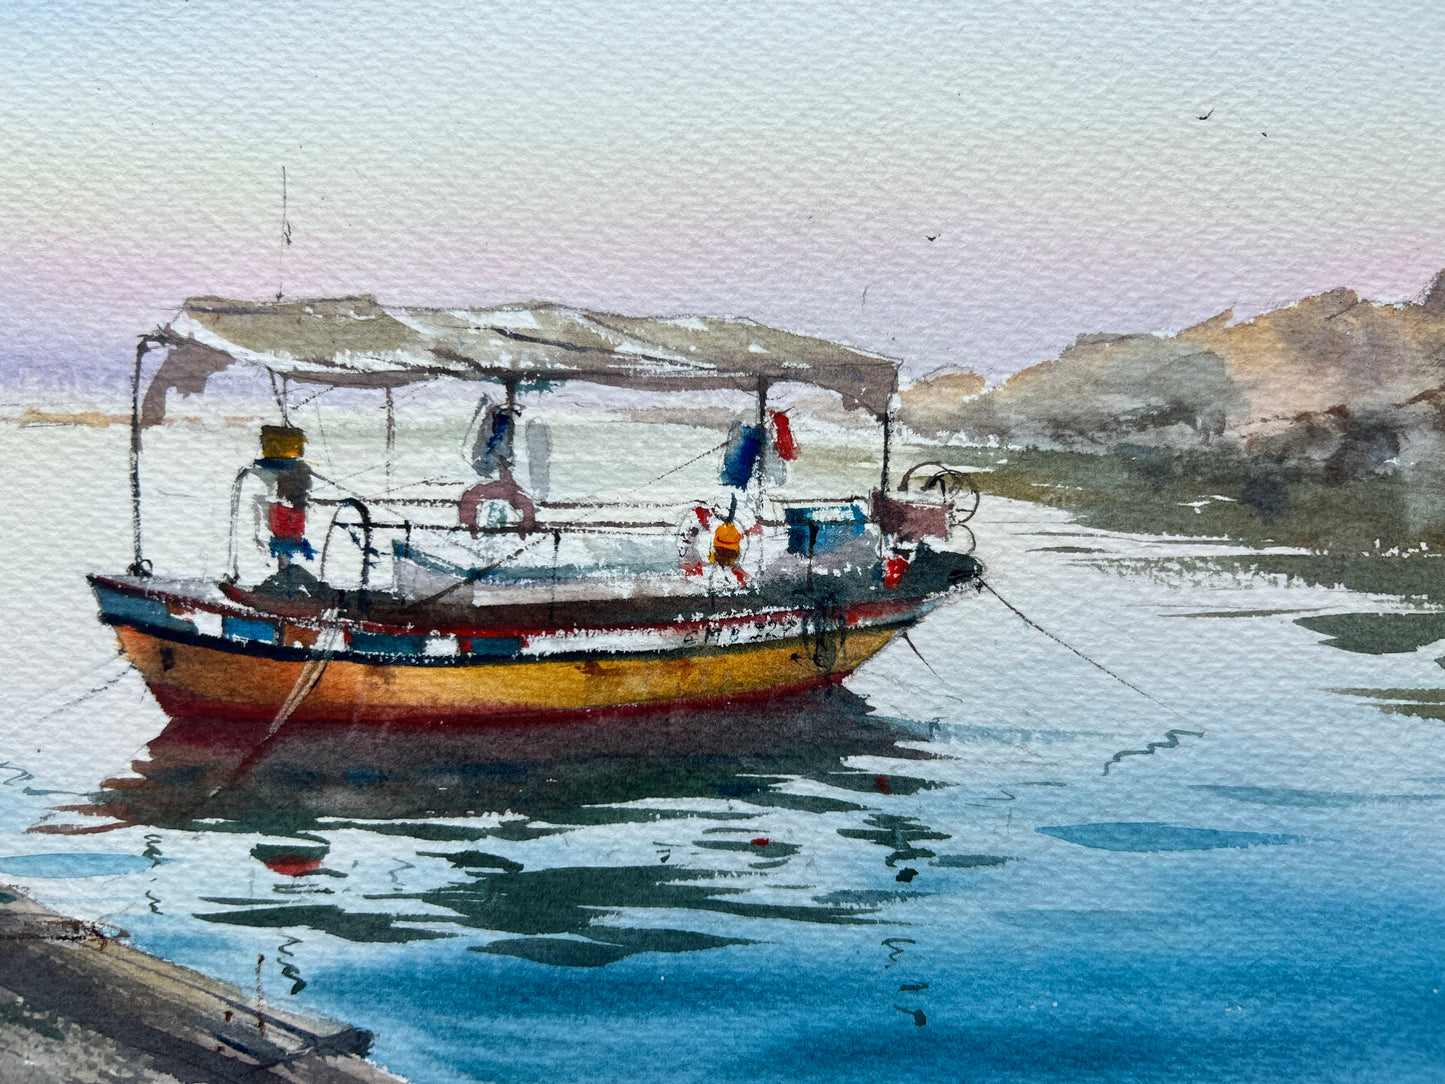 Original Painting - 'Boat on the Pier #4' 8x12 Watercolor Fishing Boat Artwork, Ideal Gift for Maritime Art Enthusiast